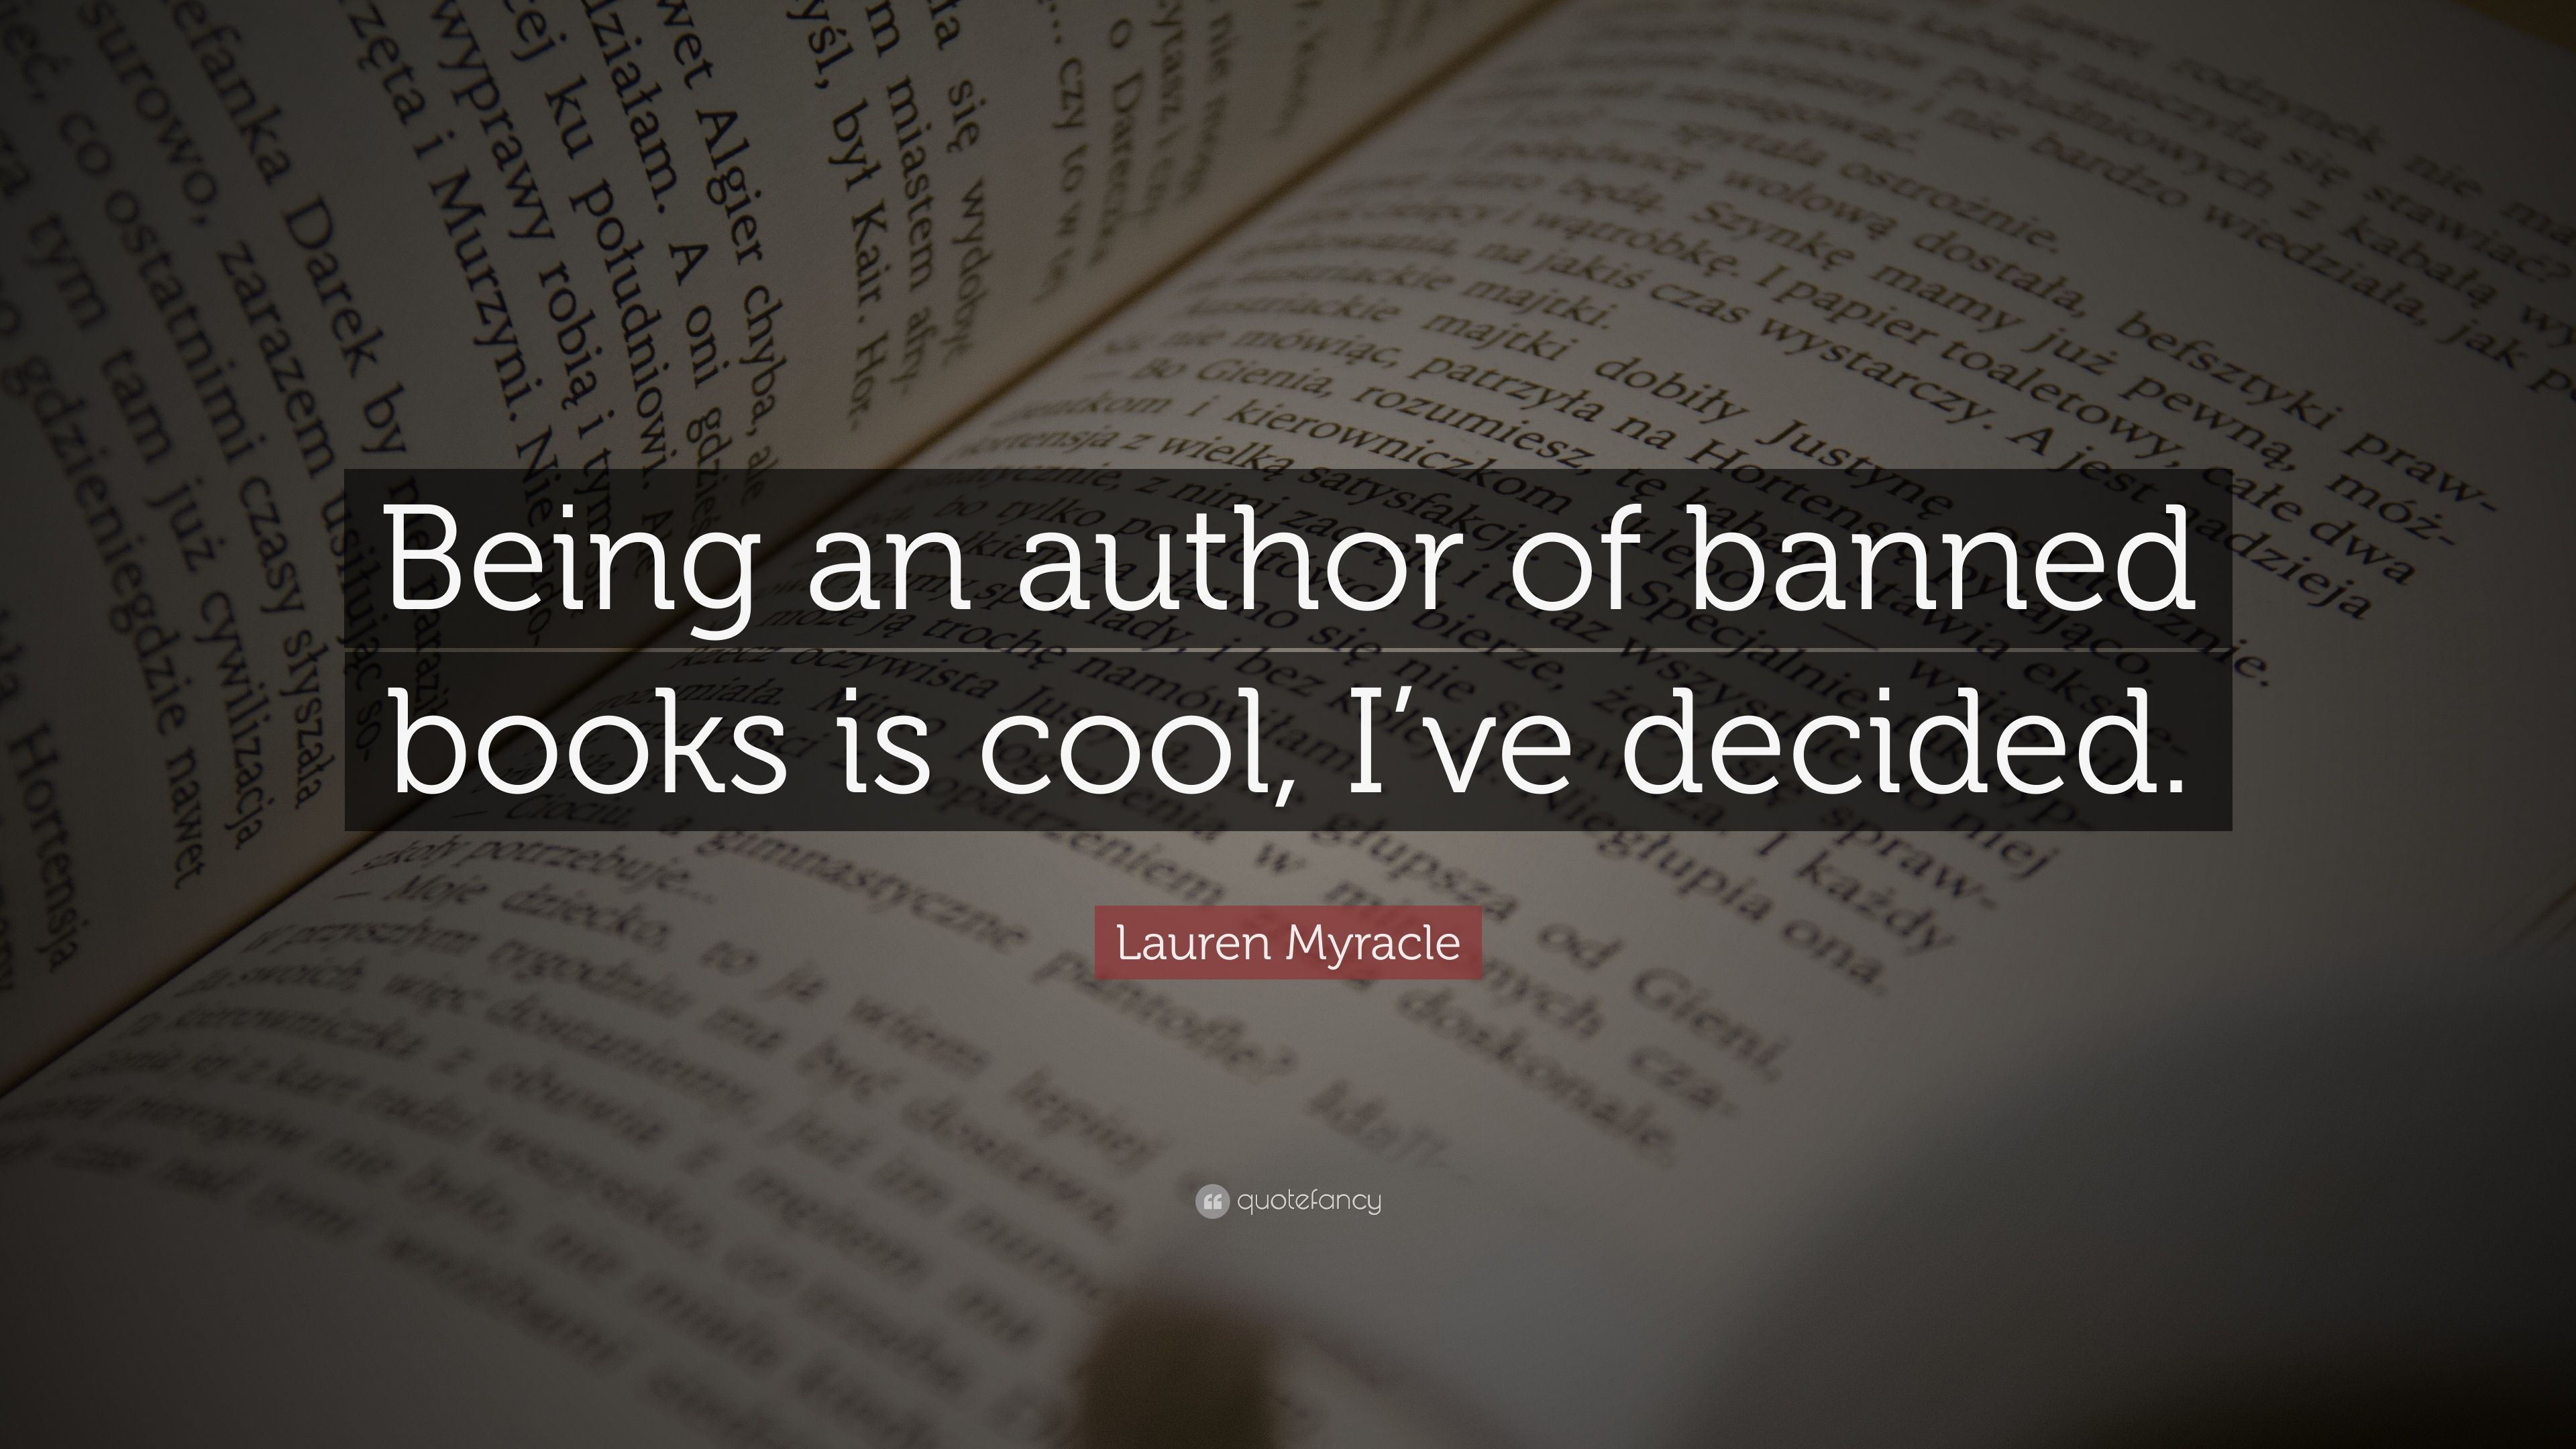 Lauren Myracle Quote: “Being an author of banned books is cool, I've decided.” (7 wallpaper)